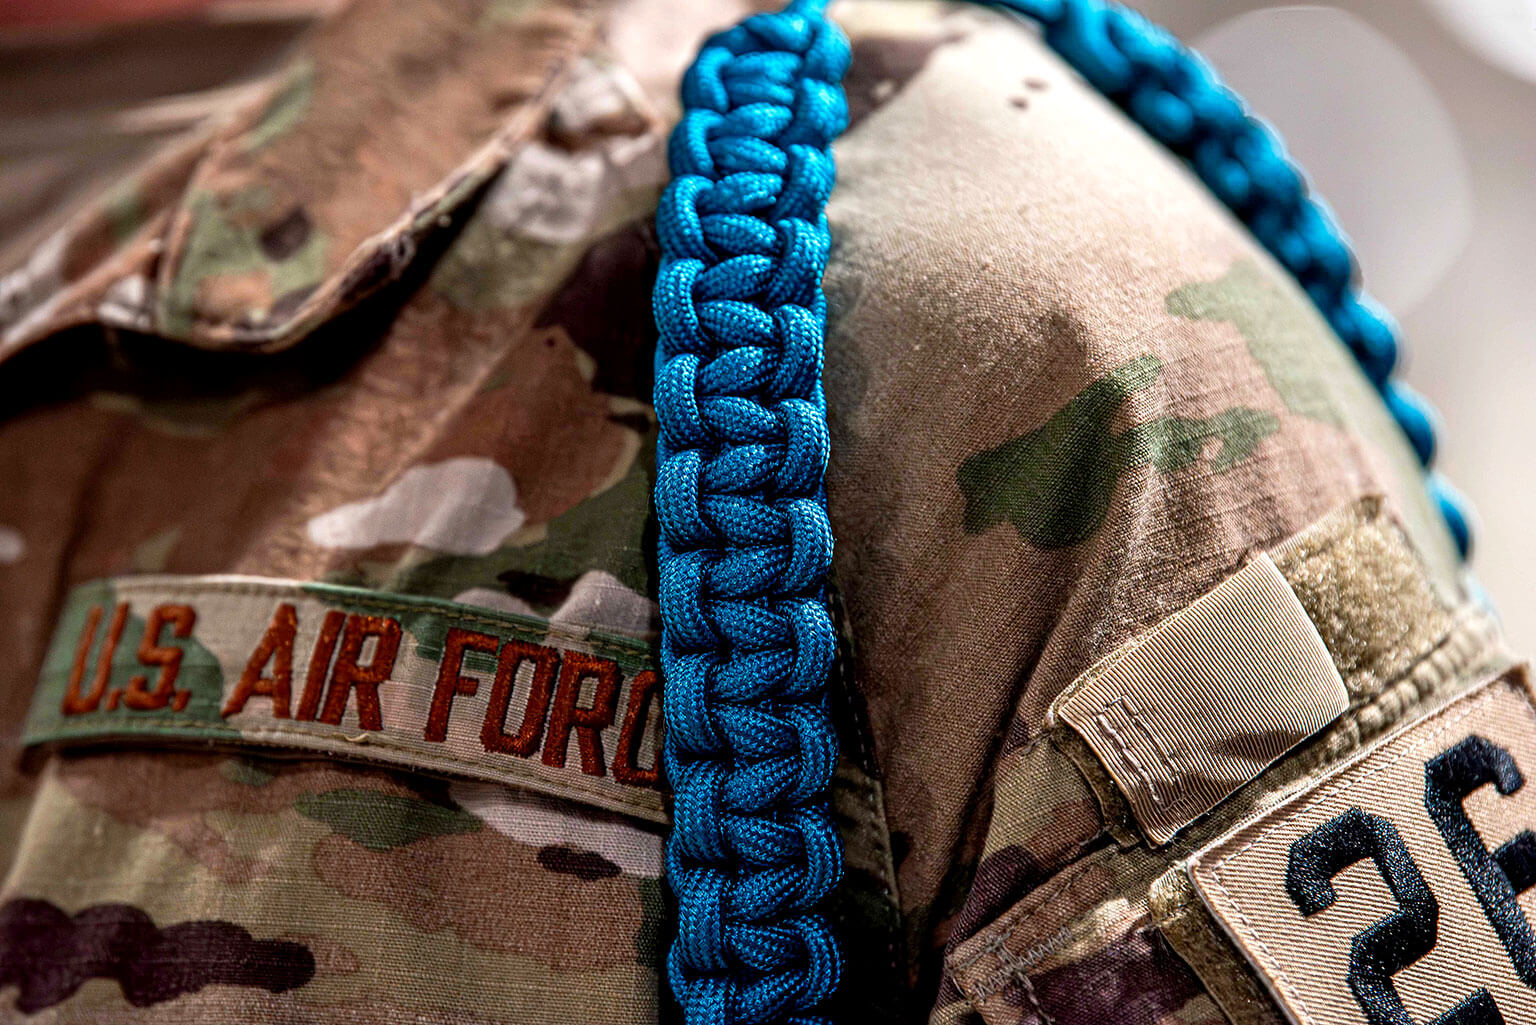 Teal rope cadets are placed throughout the squadrons in the Cadet Wing at the U.S. Air Force Academy.